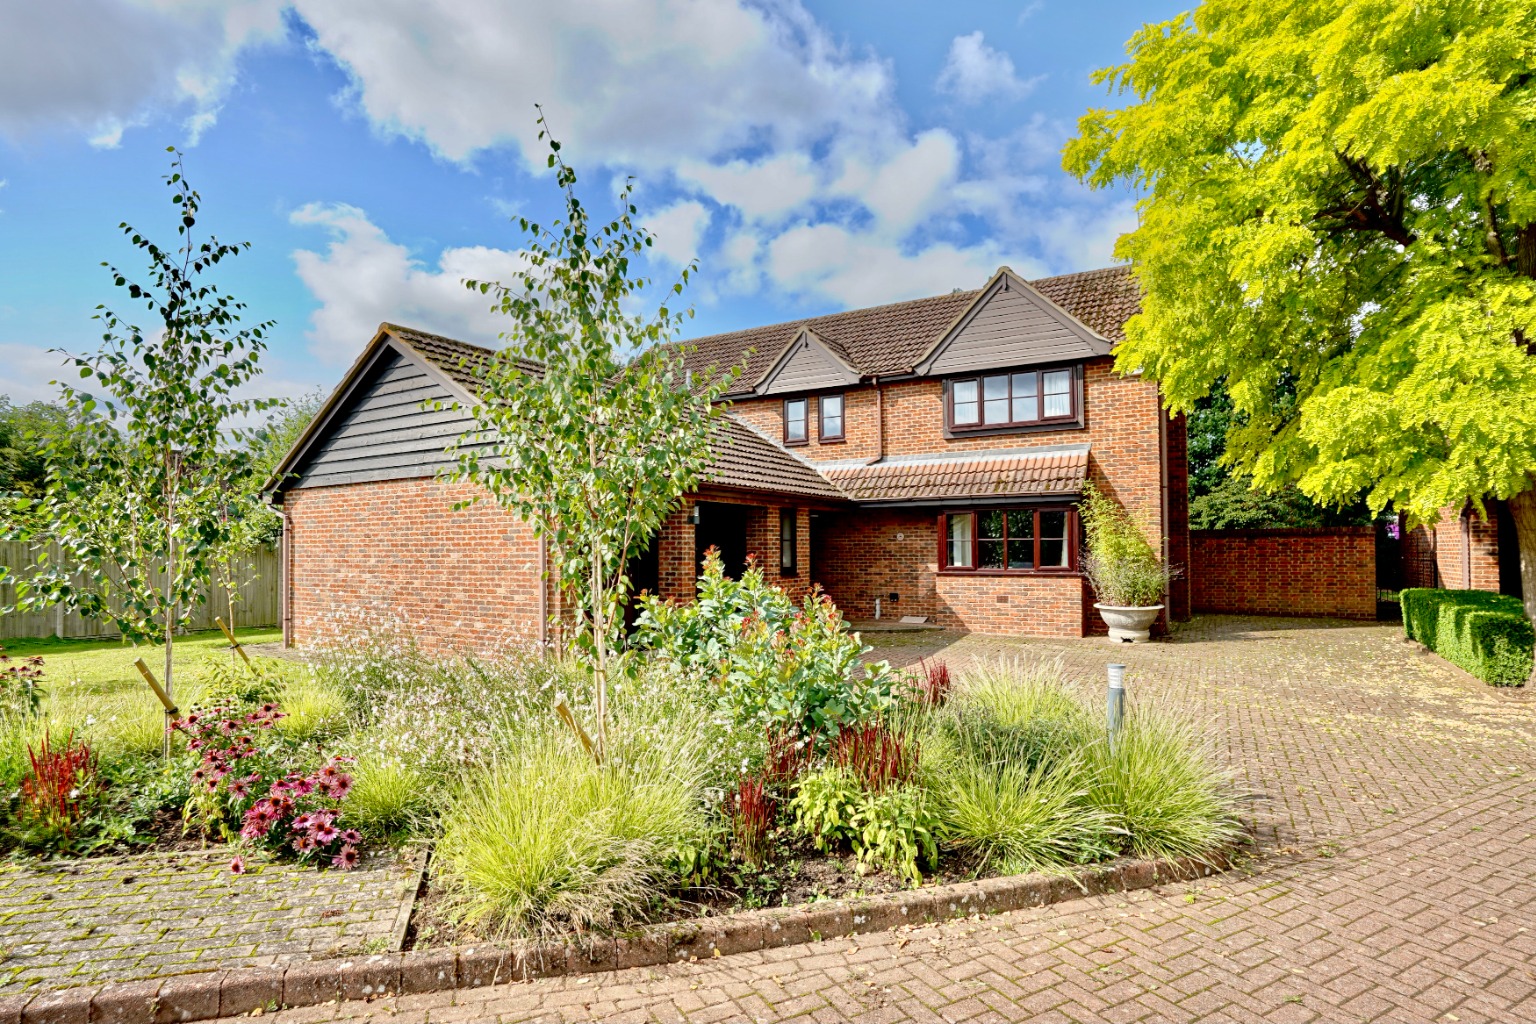 4 bed detached house for sale in The Barns, St. Neots  - Property Image 1